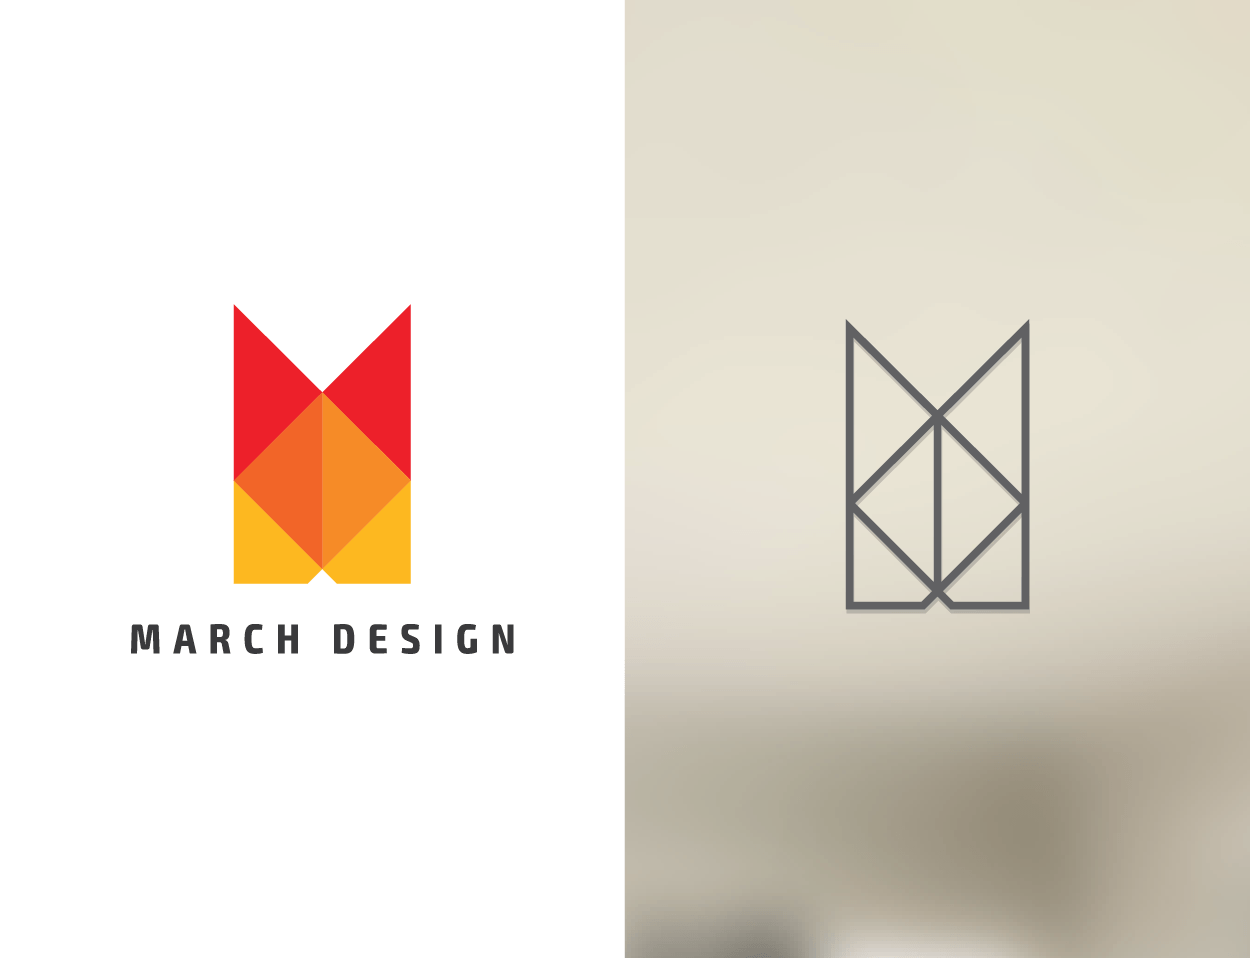 March Logo - Professional, Upmarket, Architecture Logo Design for MD or March